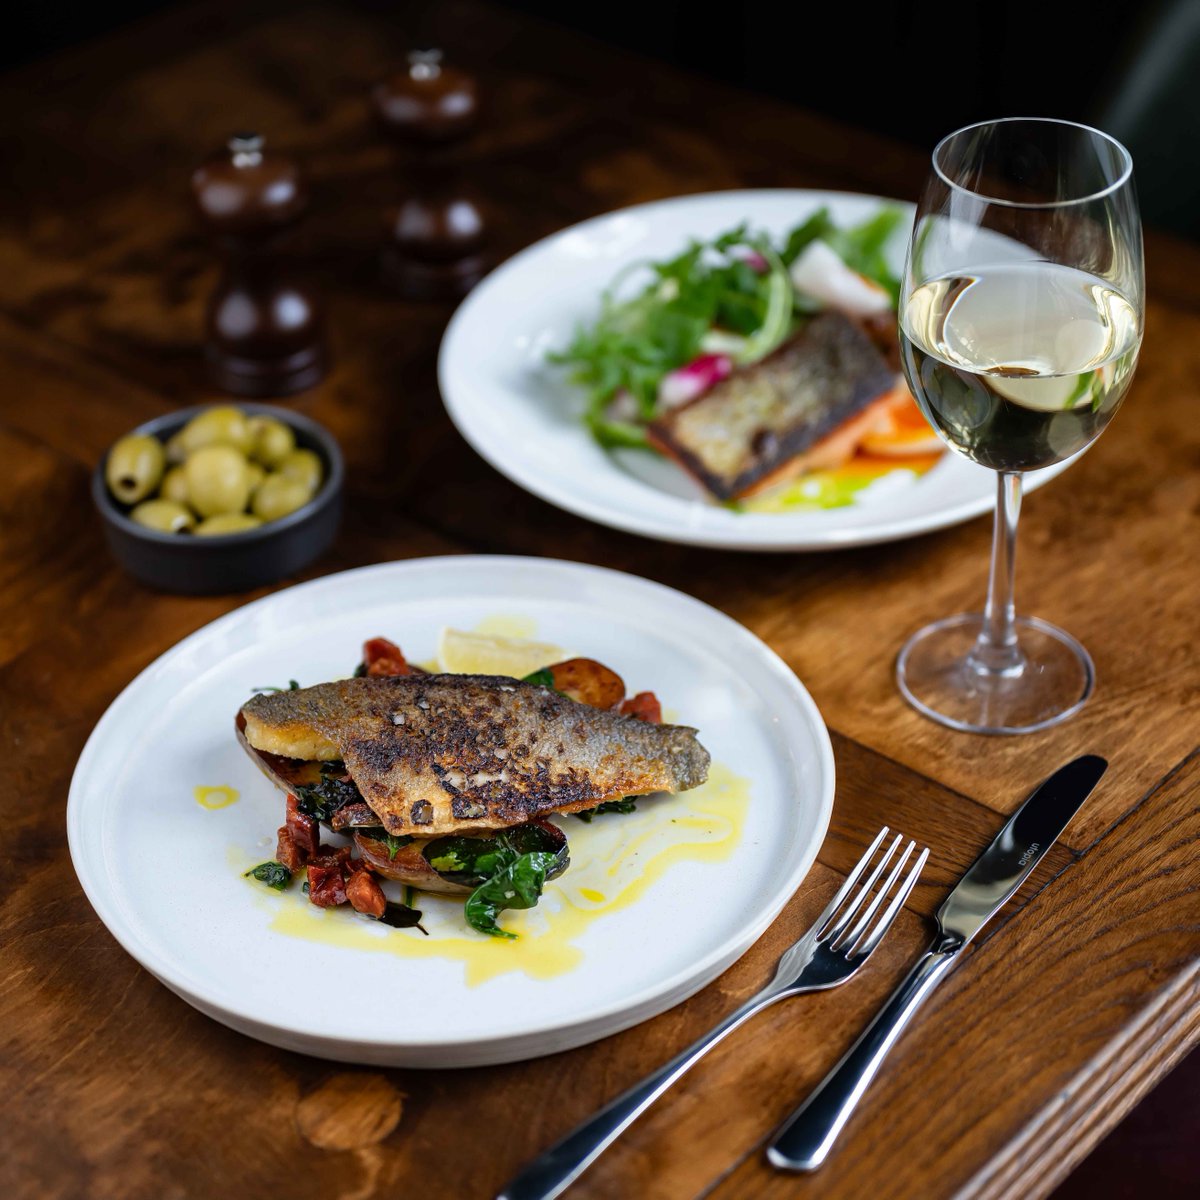 Sea bass or Salmon? 🐟

Our new menu has some delicious fish dishes on it, why not pop in and give them a go? 🤩

#VisitCambridge #CambridgeEats #GastroPub #SeafoodFeast #FishDishes #FoodieFinds #LocalFlavors #FreshCatch #TasteofCambridge #GourmetFish #DeliciousDishes #PubGrub